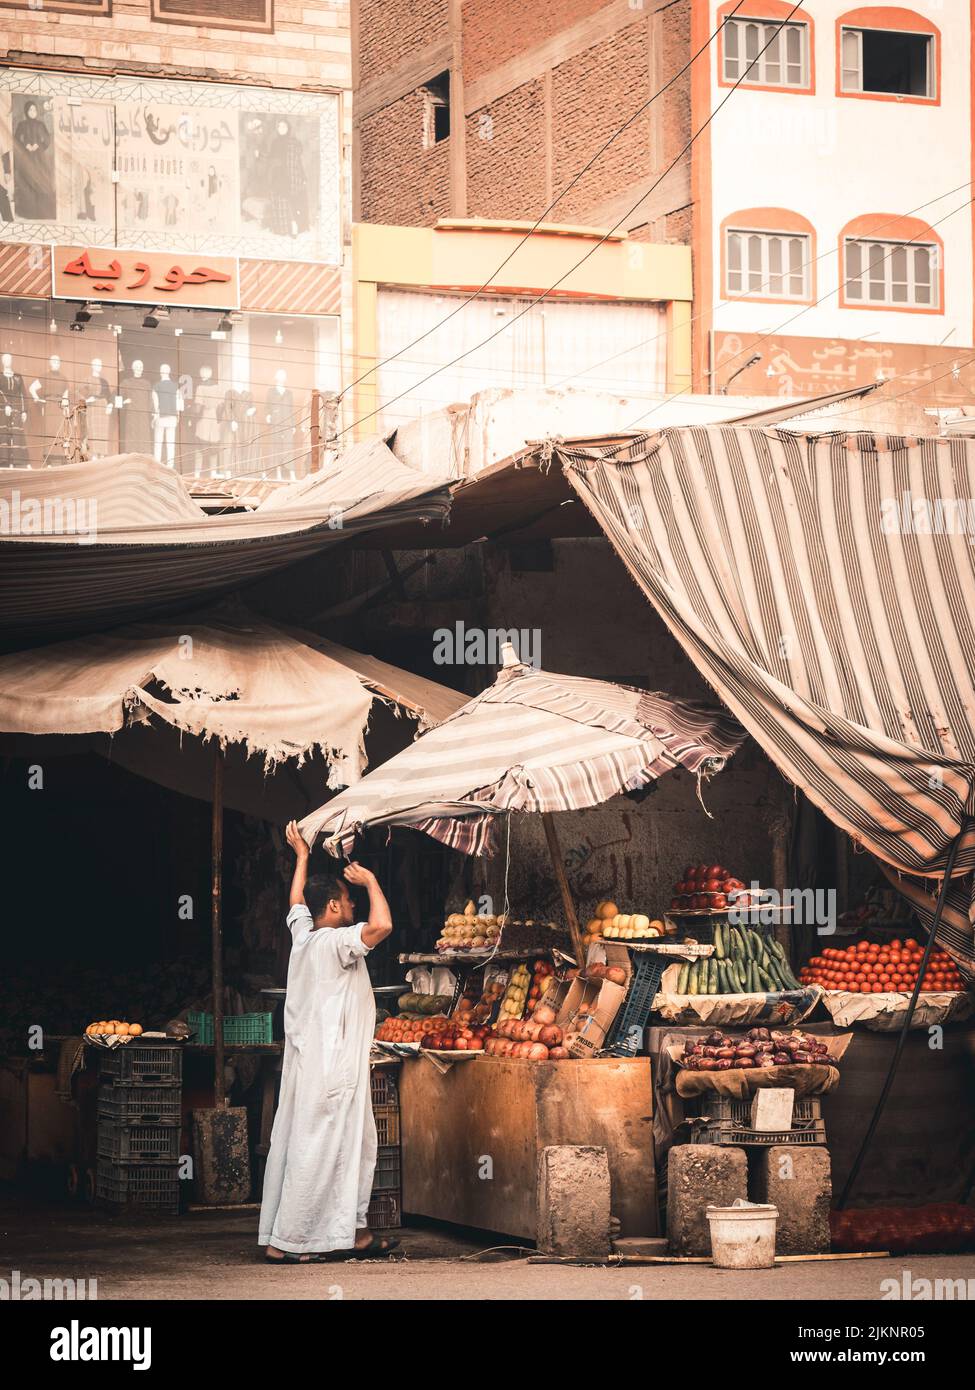 A life style and street photo in aswan, egypt Stock Photo